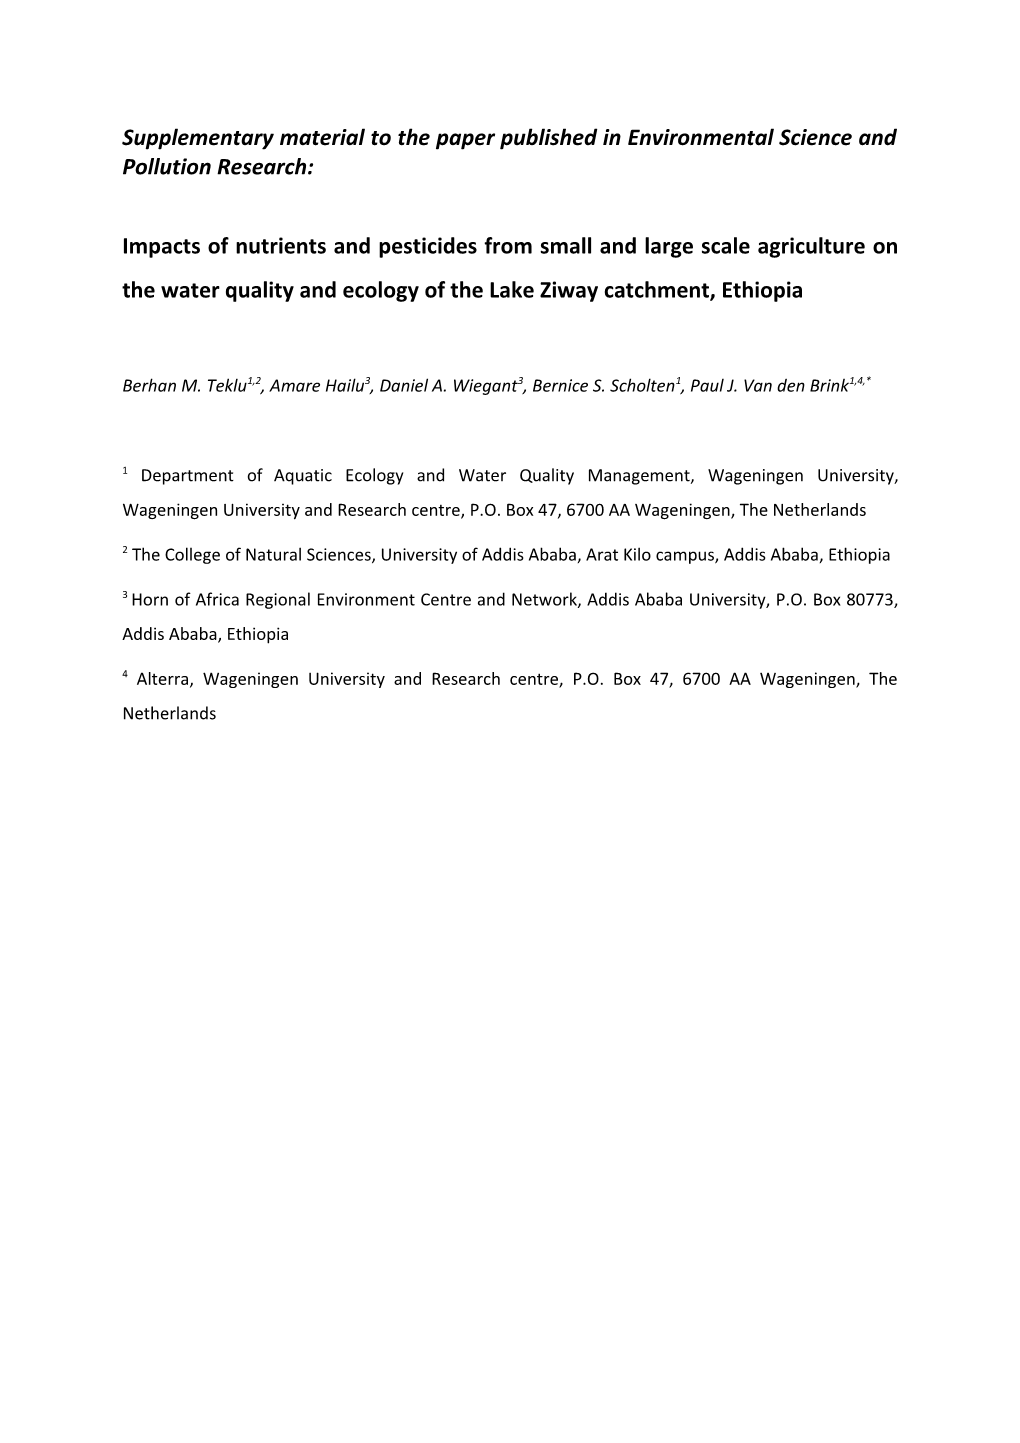 Supplementary Material to the Paper Published in Environmental Science and Pollution Research